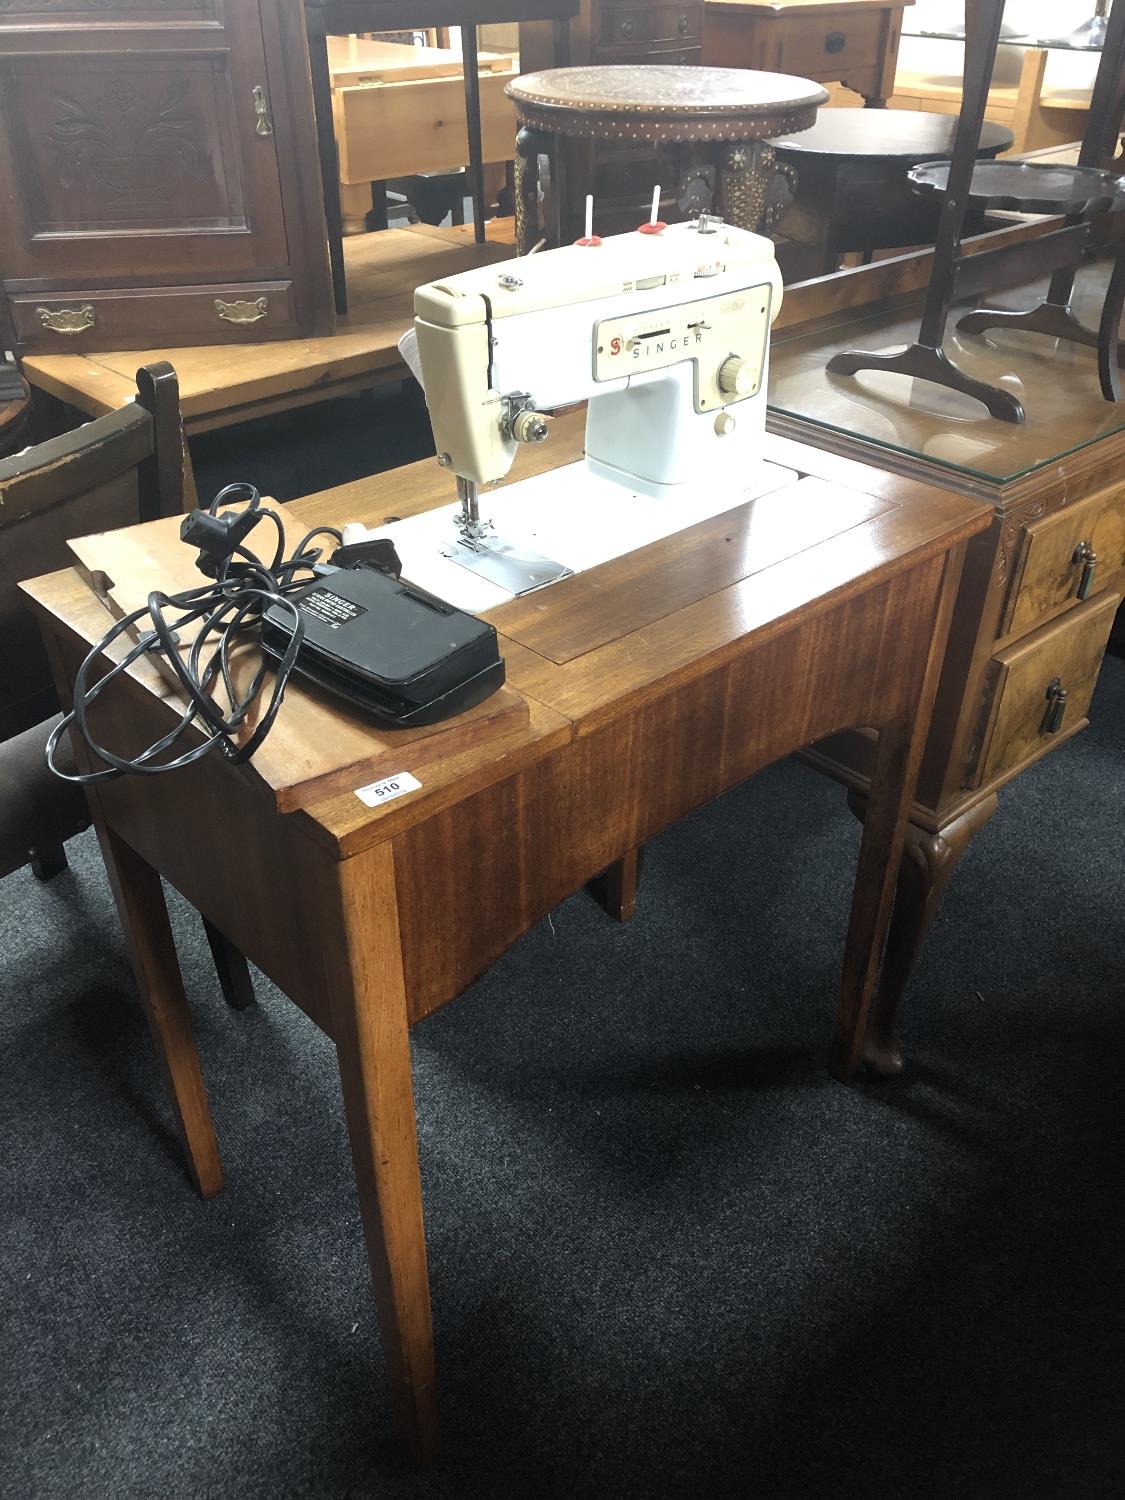 A Singer sewing machine in table - Image 2 of 5